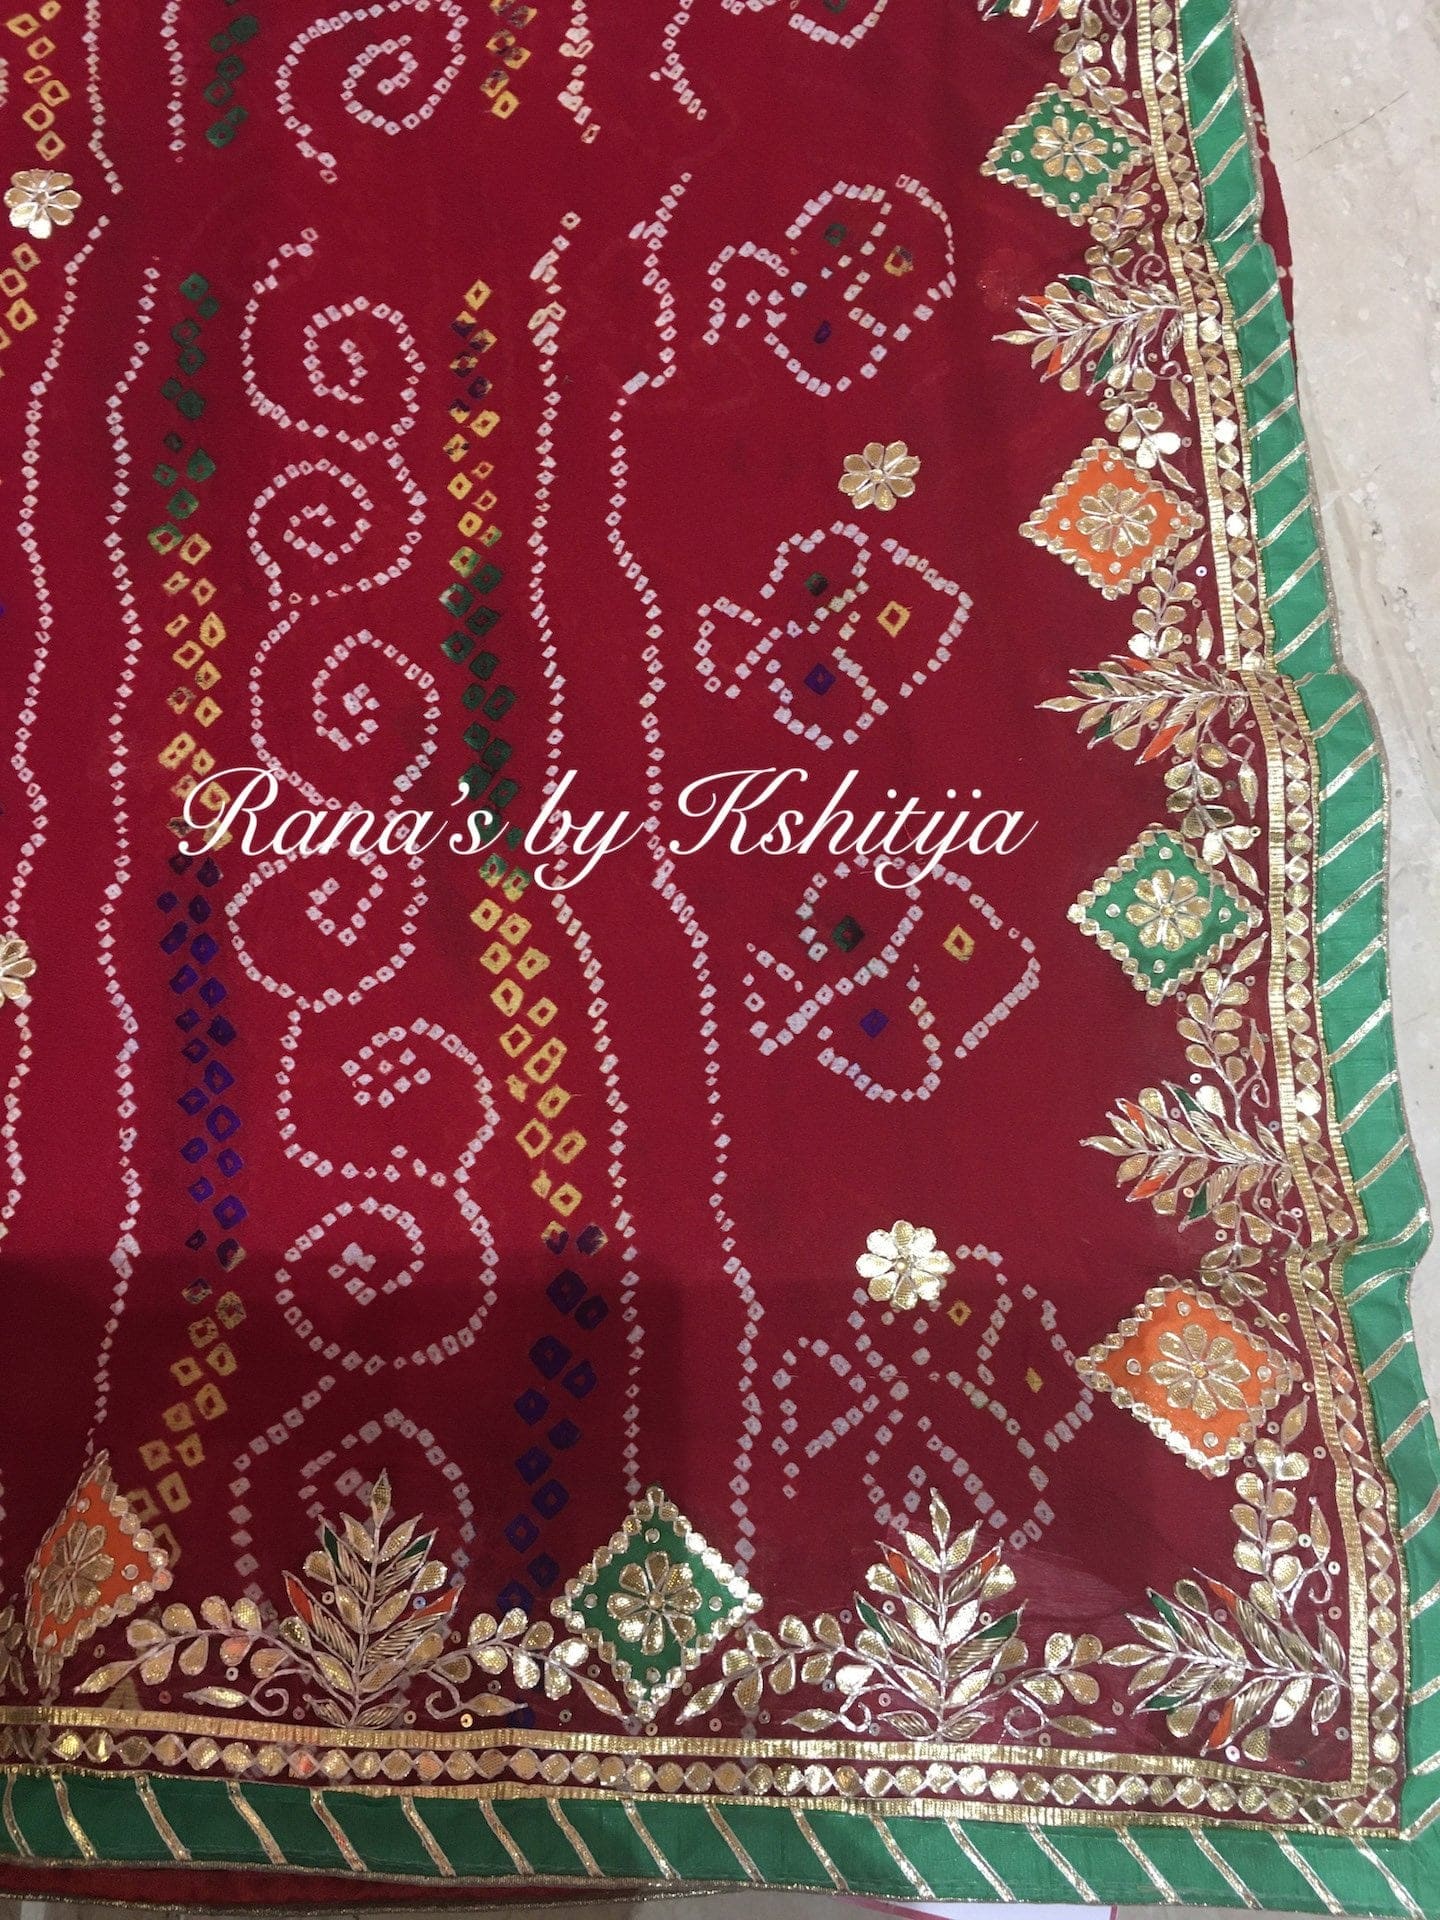 Fine Gota Worked Bandhej Saree in Red Color